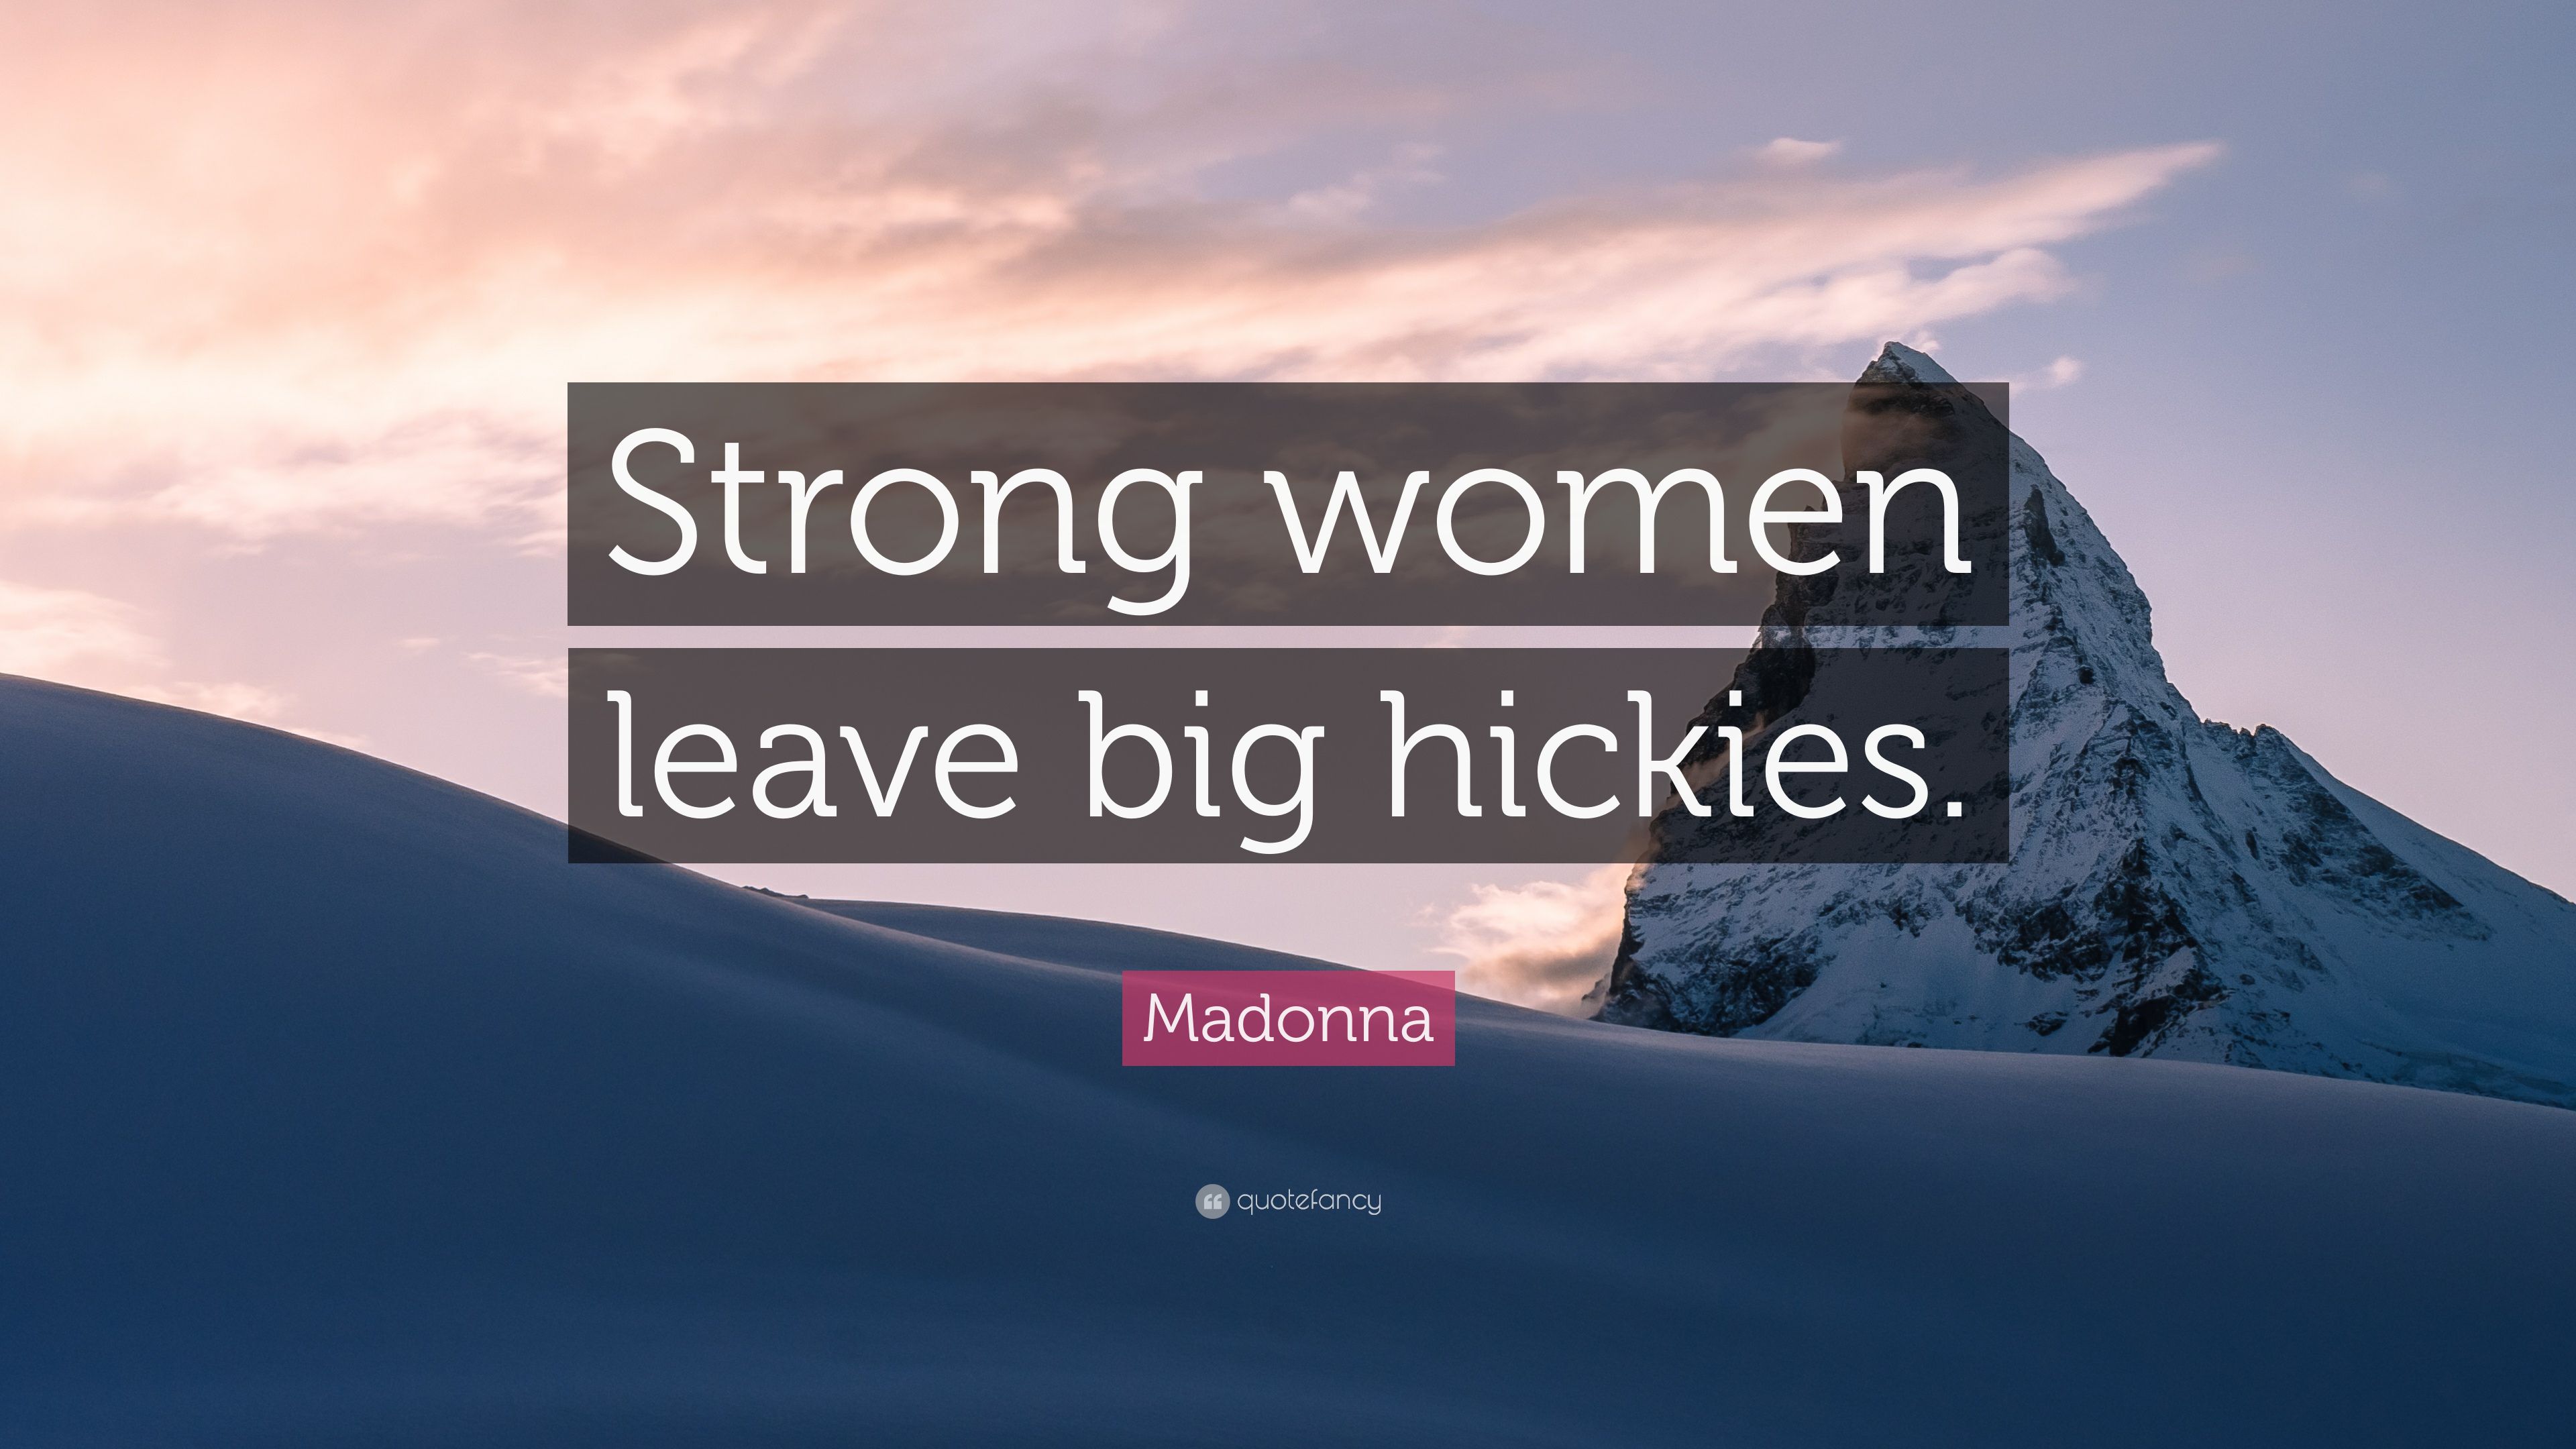 Madonna Quote: “Strong women leave big hickies.” 7 wallpaper